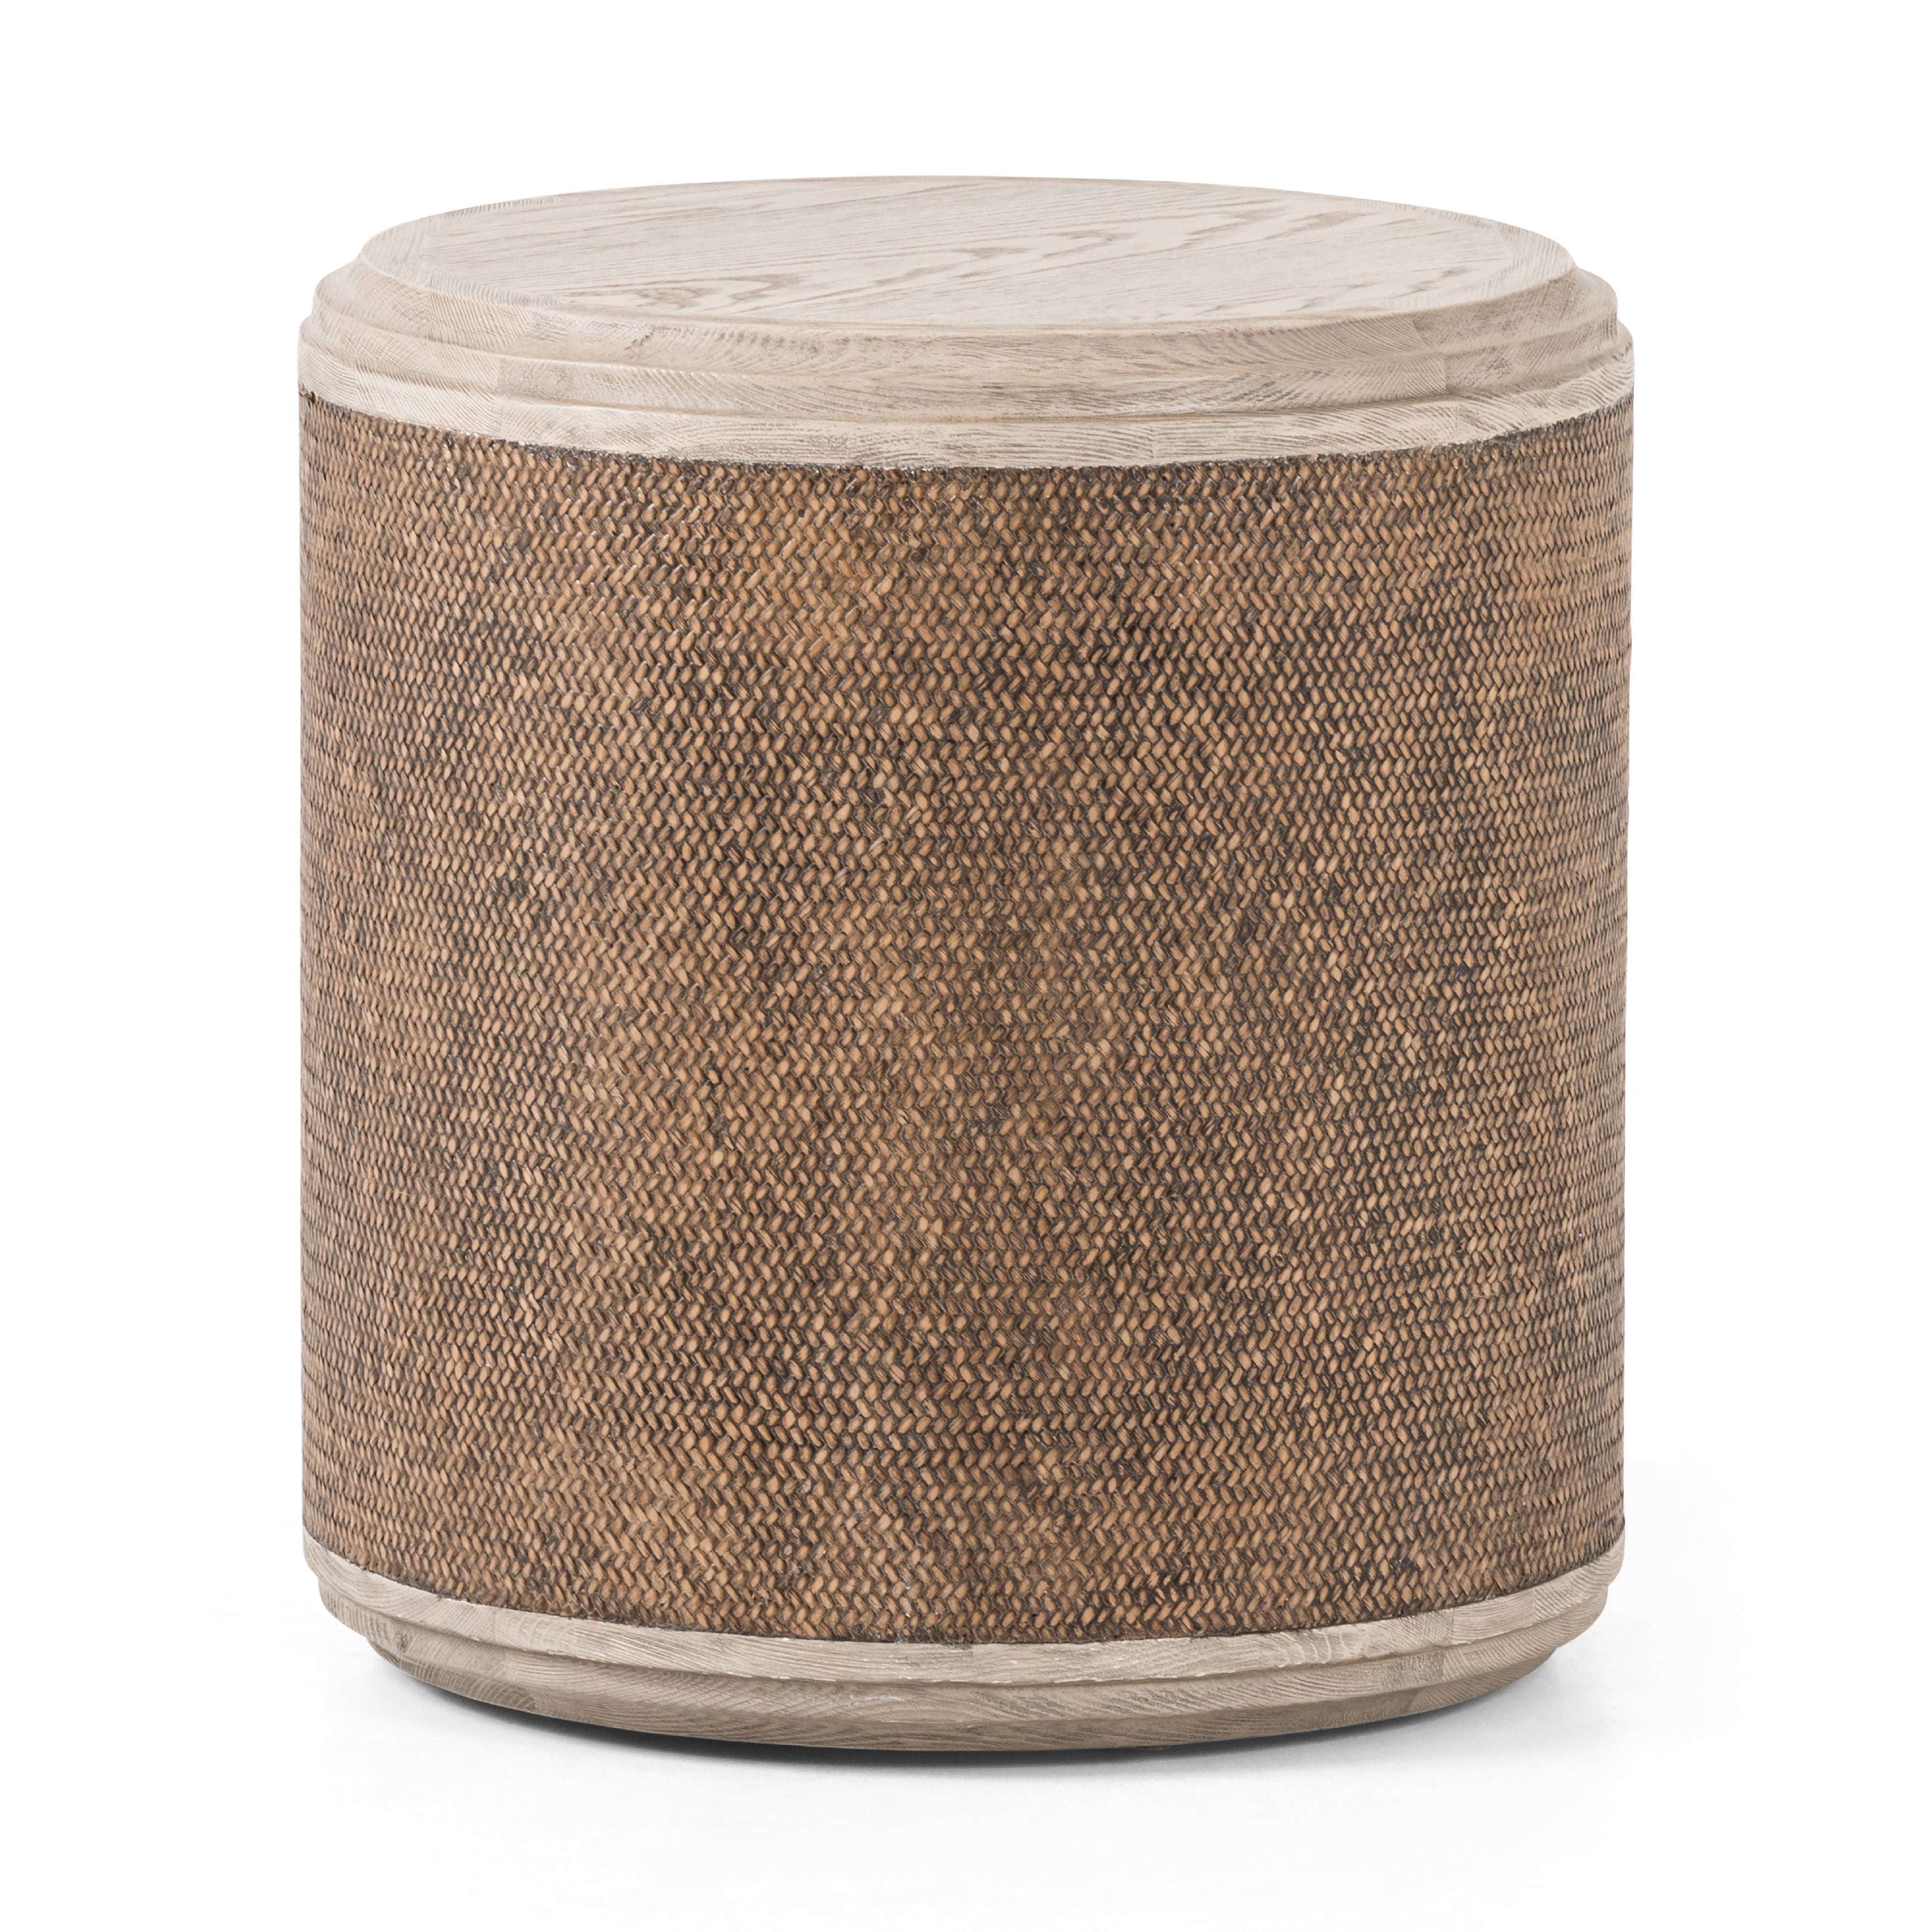 The Kiara End Table is crafted from durable solid pine and weathered blonde oak veneer for long-lasting quality. Its weathered blonde finish and rustic rattan accents provide a rustic yet modern aesthetic for any space. Perfect for any room in the house. Amethyst Home provides interior design, new home construction design consulting, vintage area rugs, and lighting in the Winter Garden metro area.